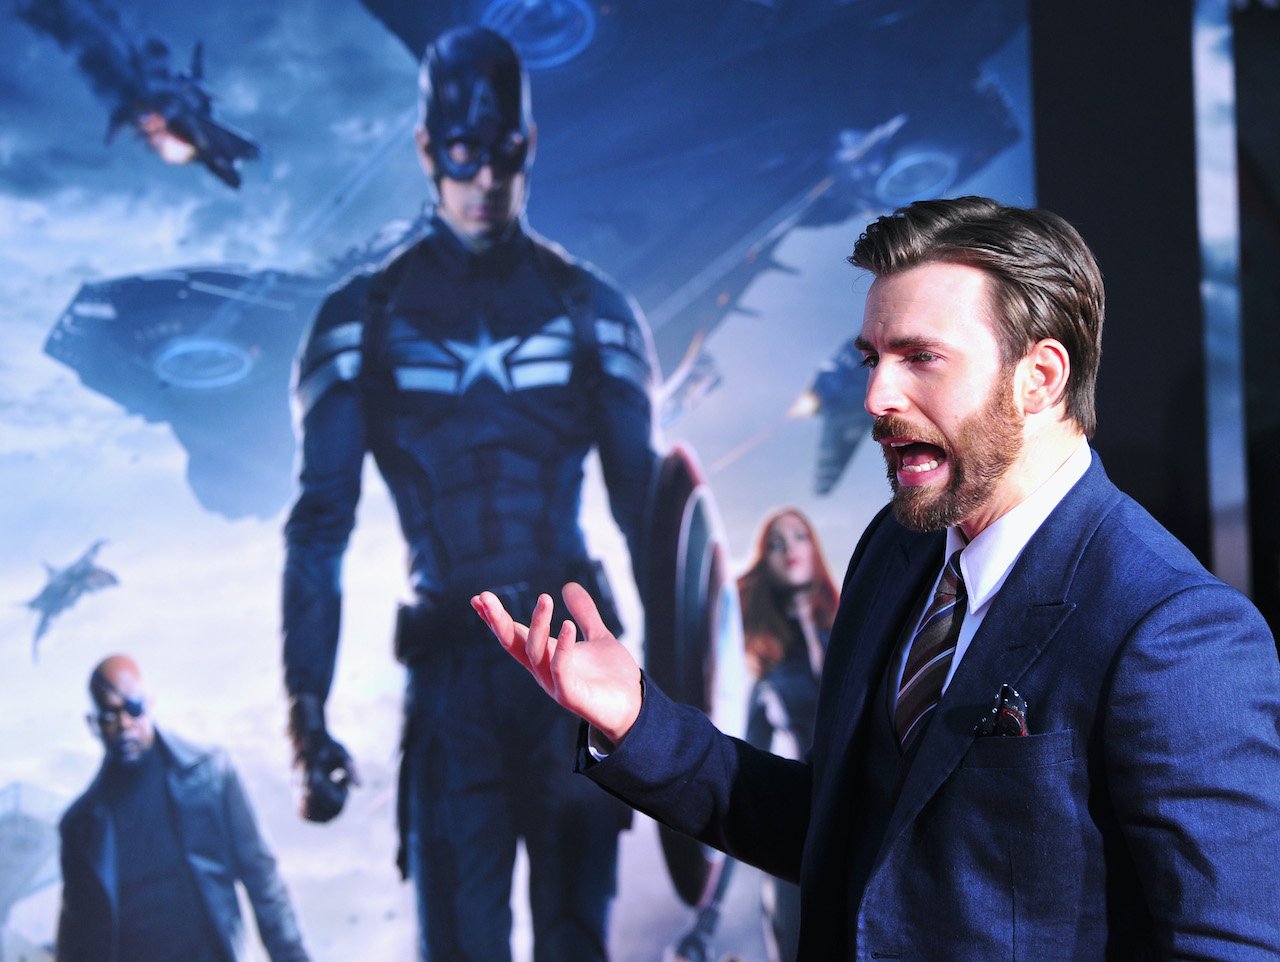 Chris Evans arrives at the premiere Of Marvel's "Captain America: The Winter Soldier